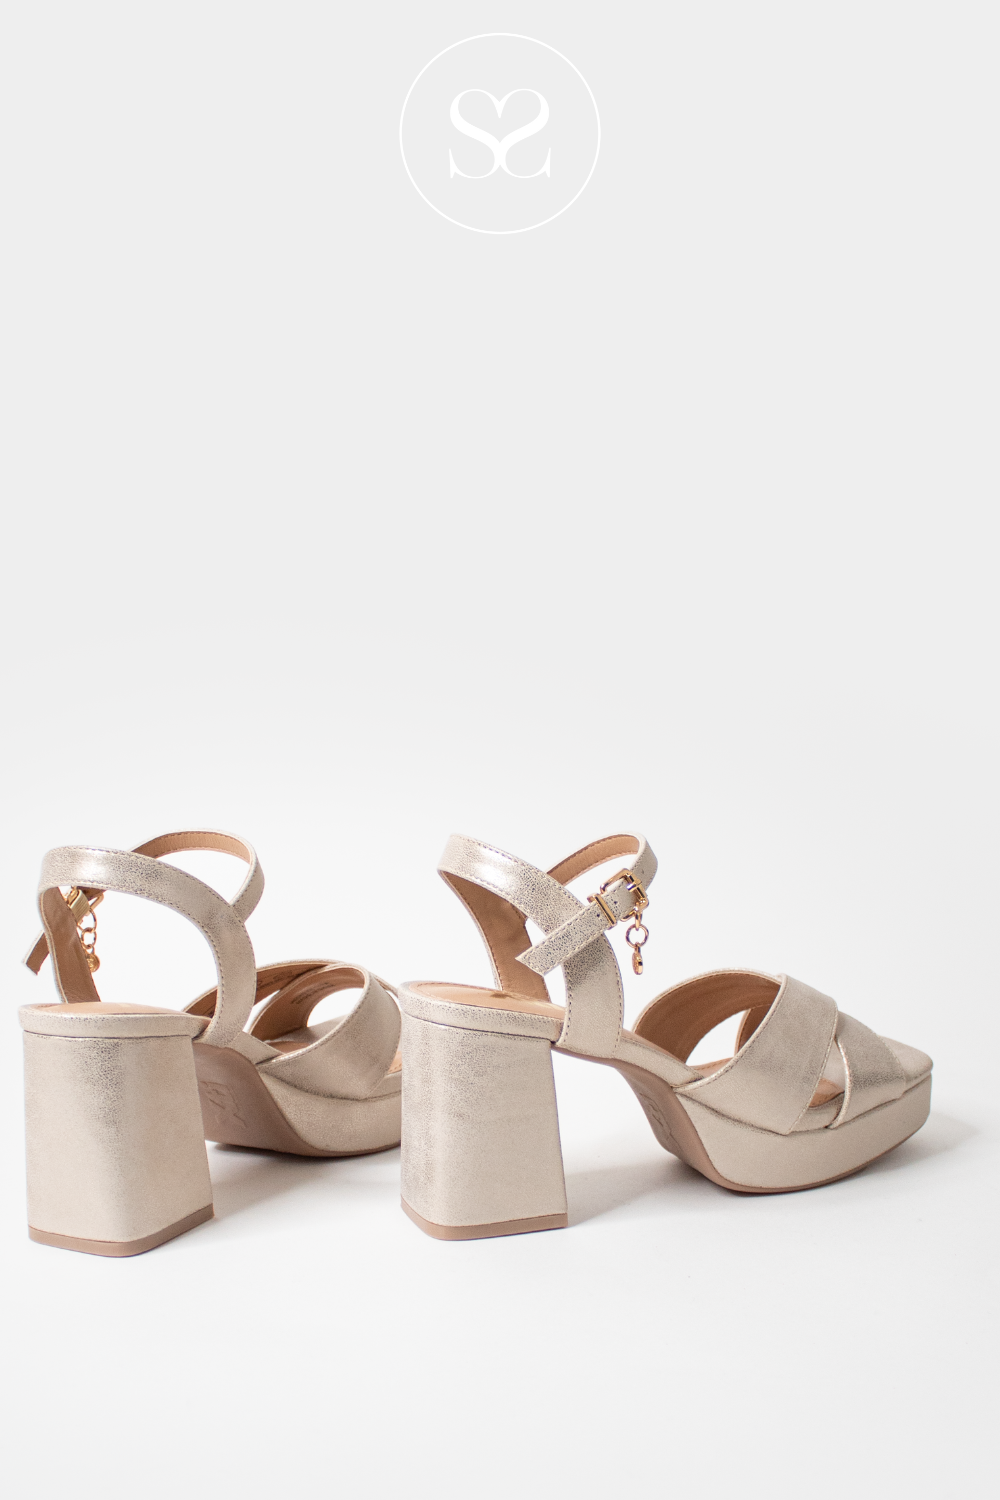 XTI 142357 GOLD PLATFORM SOLE BLOCK HEEL OPEN TOE SANDALS WITH CRISS CROSS STRAPS AND AN ADJUSTABLE ANKLE STRAP